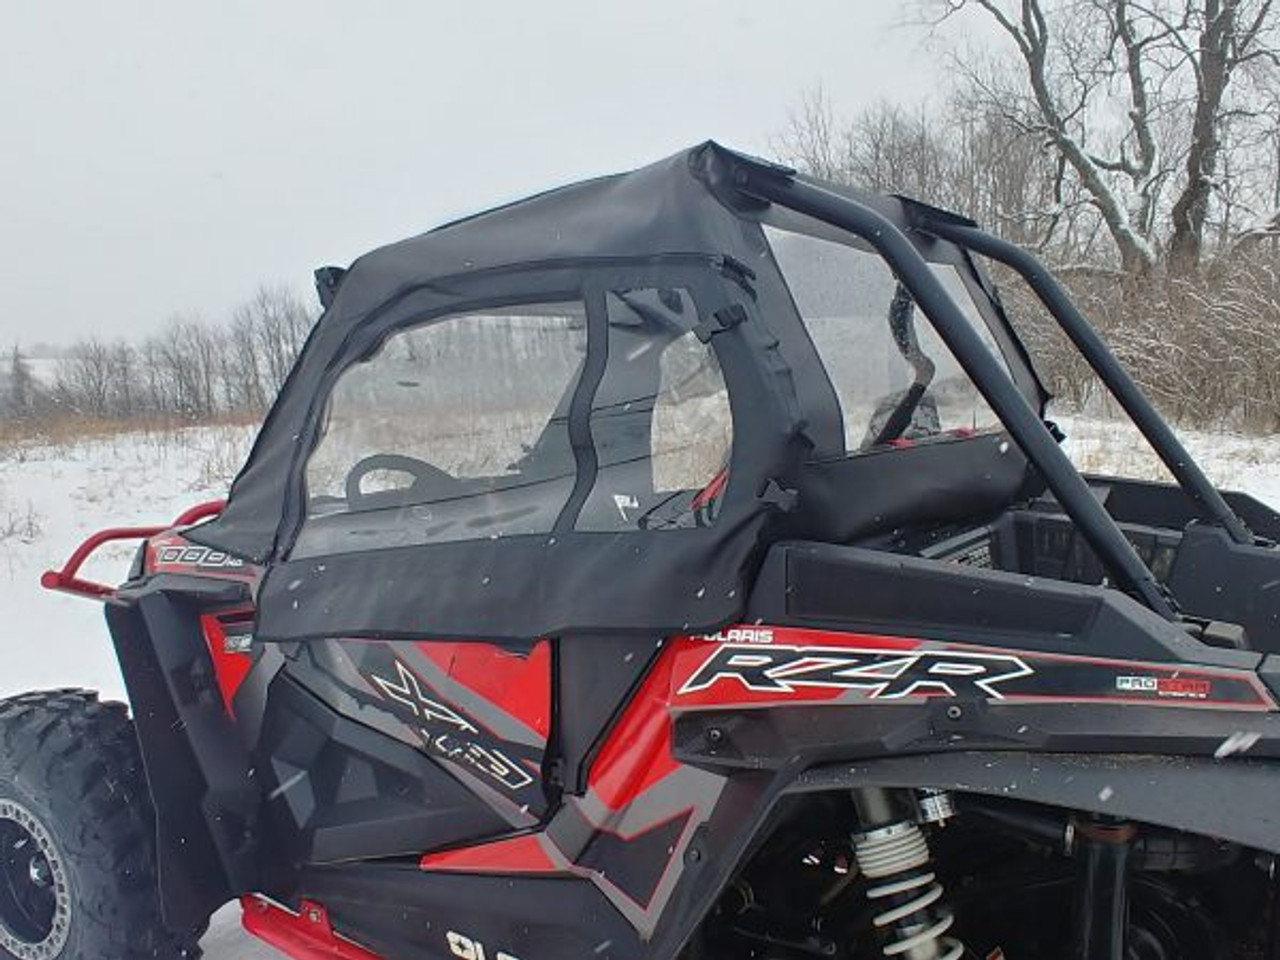 3 Star side x side accessories Polaris RZR XP1000/XP Turbo/S1000 Full Cab Enclosure for Hard Windshield rear and side angle view